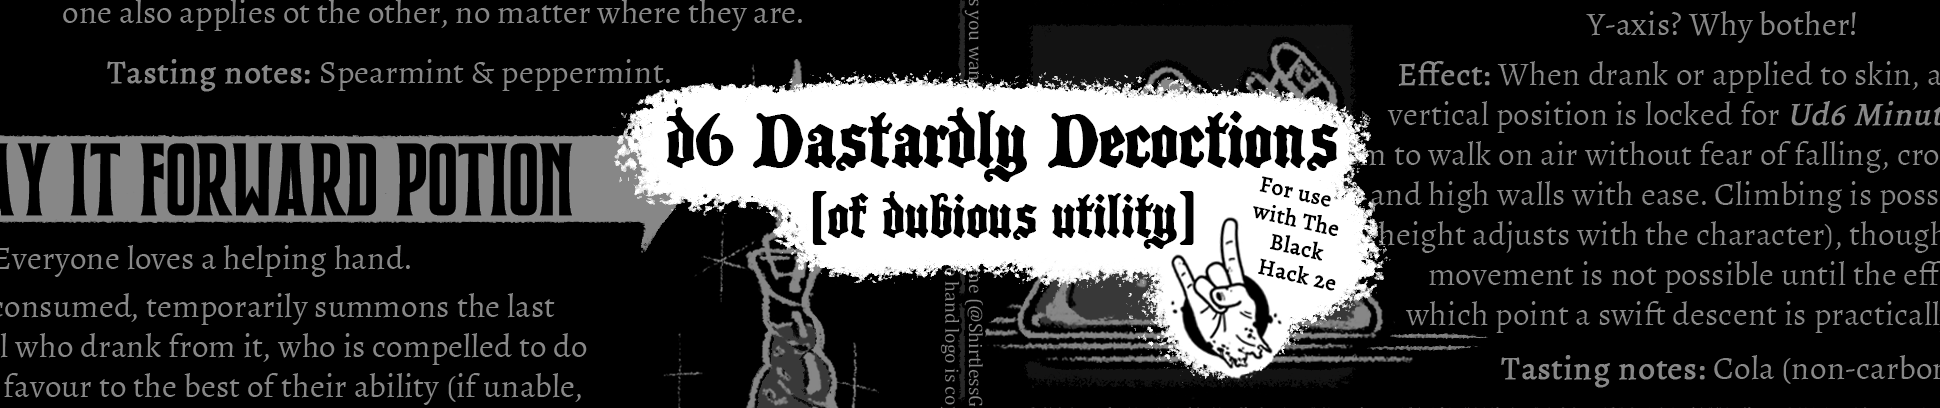 d6 Dastardly Decoctions [of Dubious Utility]